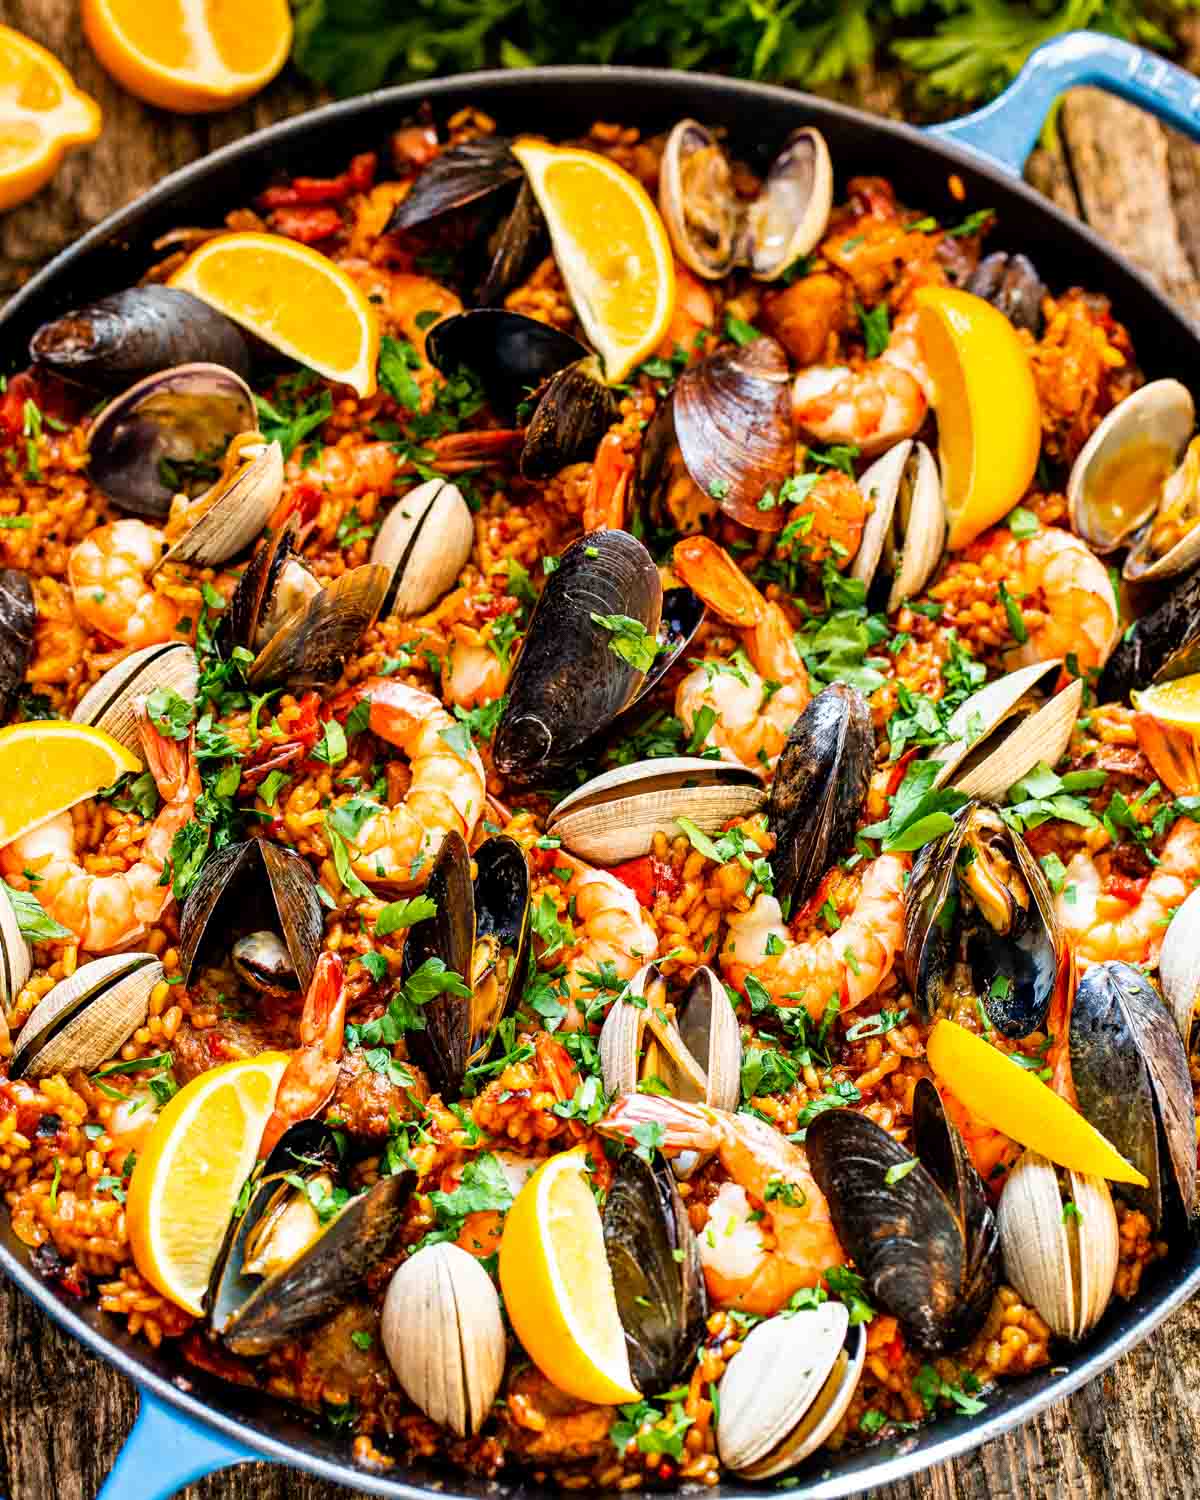 freshly made chicken and seafood paella.